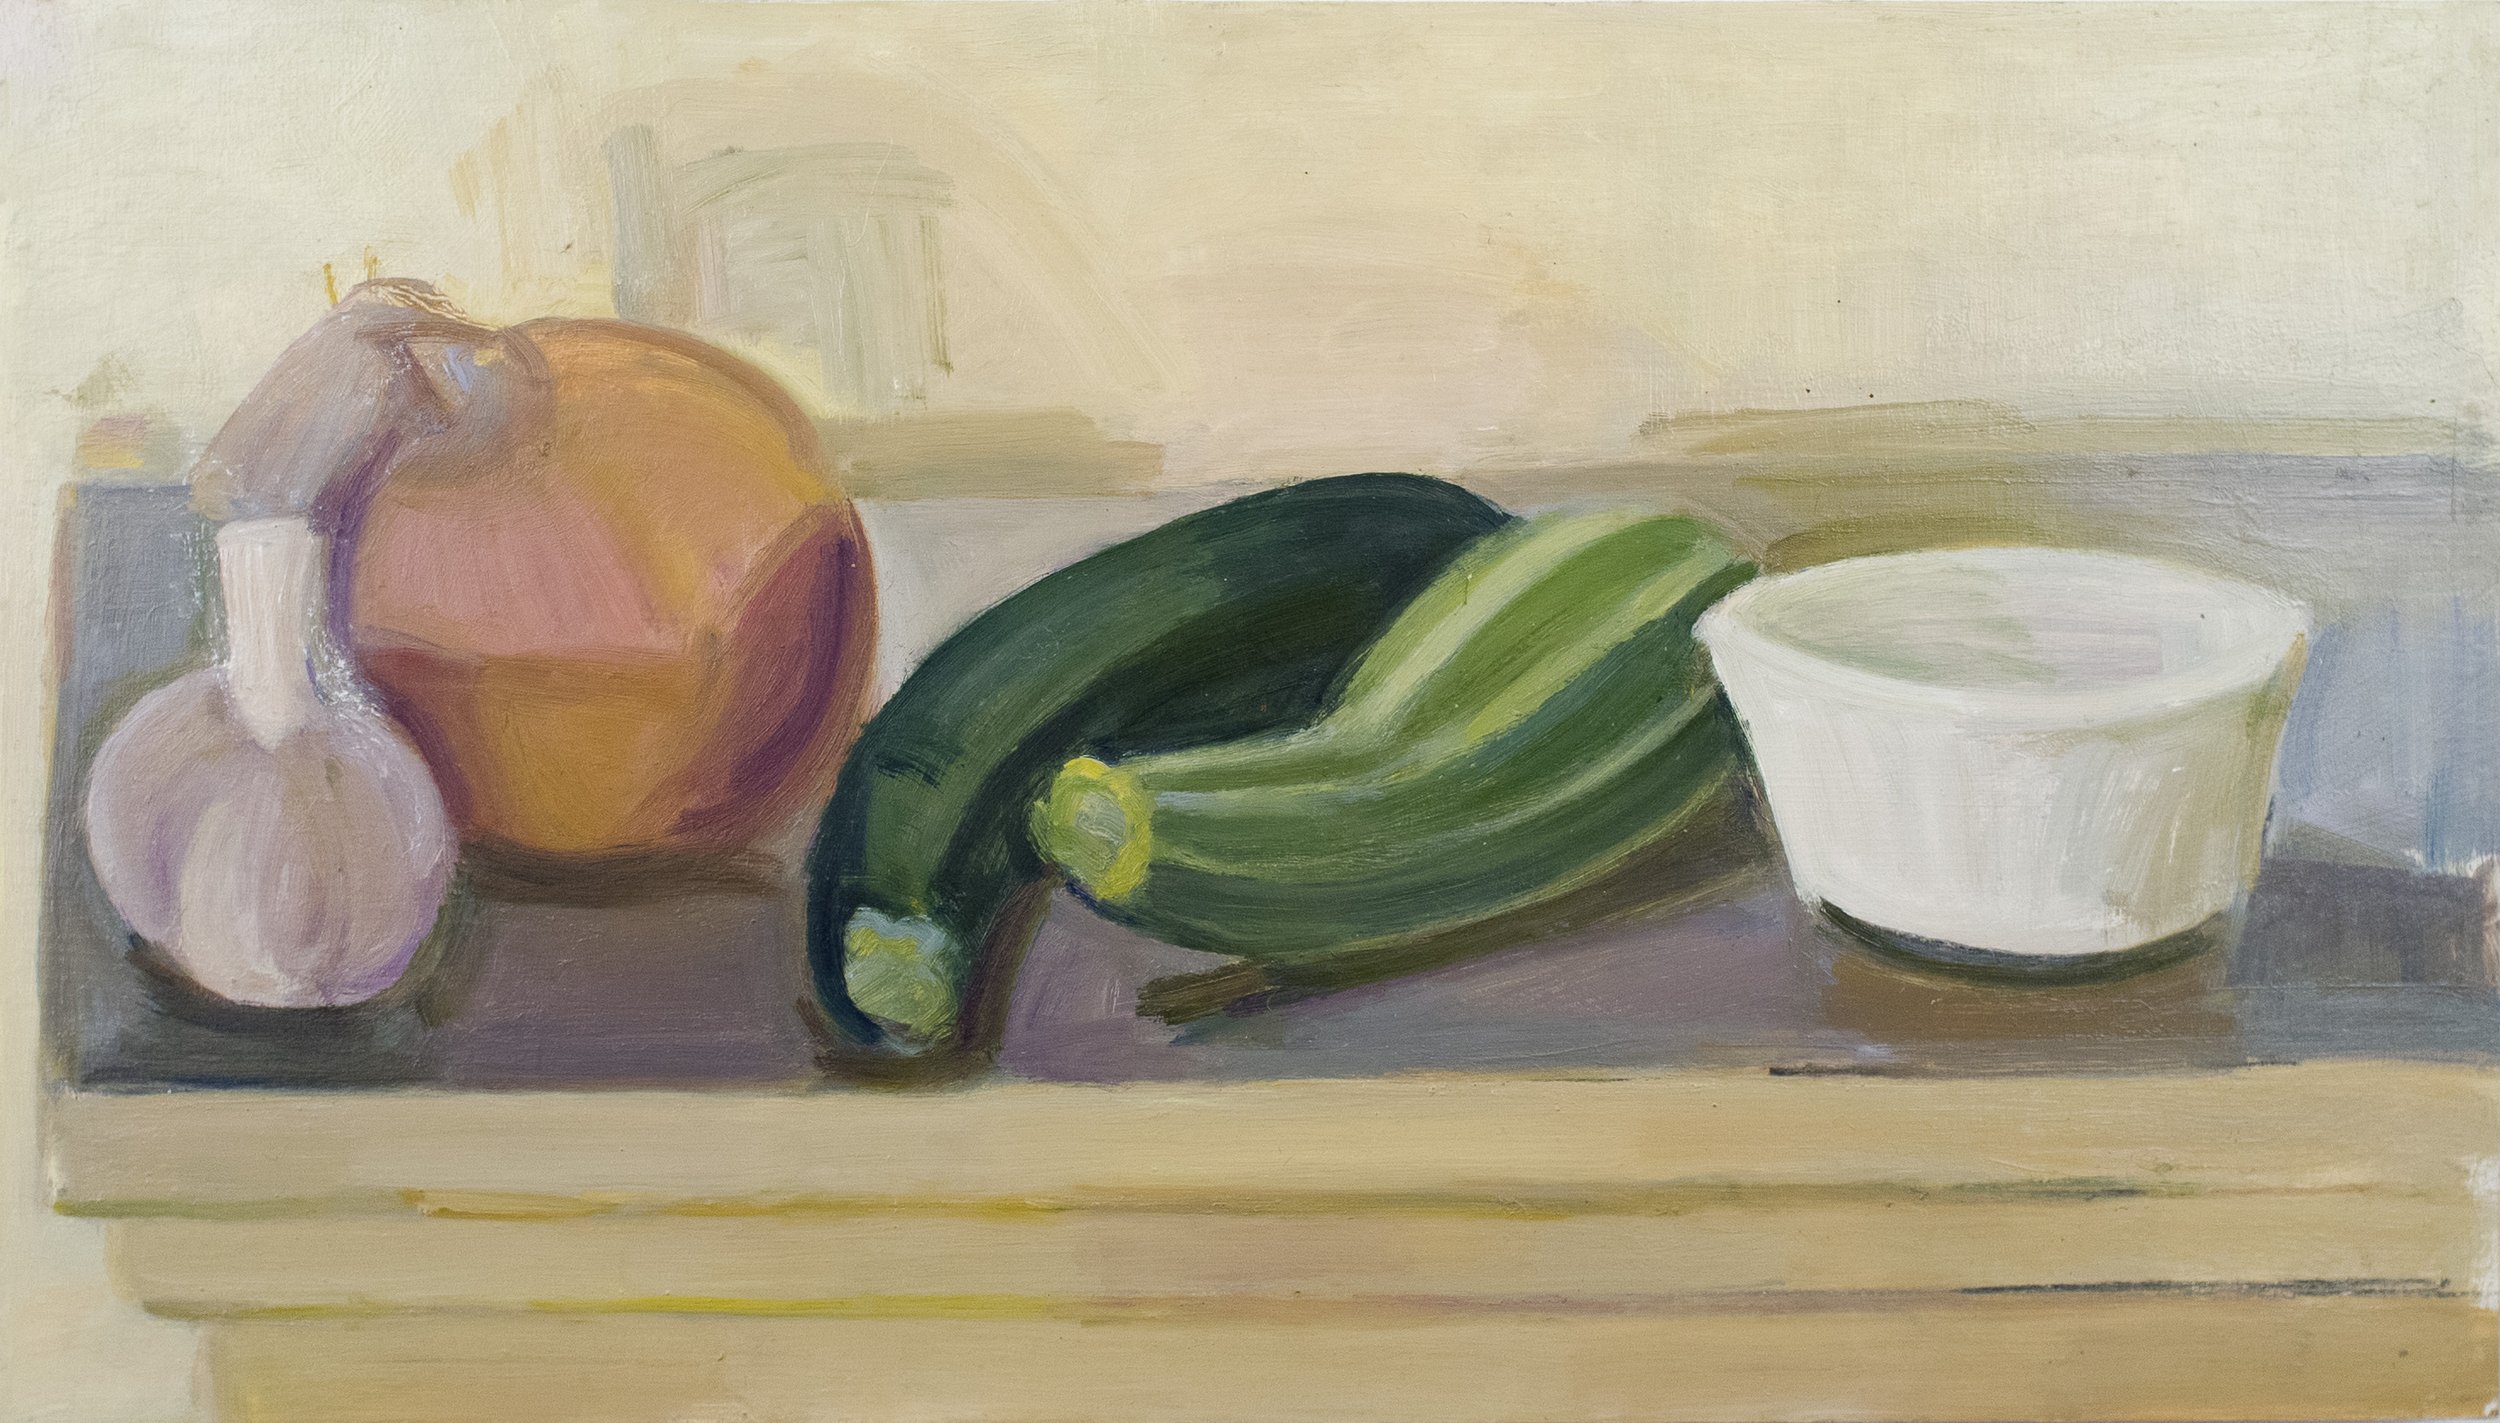   Garlic, Onion, Zucchini and Tiger Squash with Ramekin , 2018, oil/panel, 9 x 16 in. (Not for sale) 